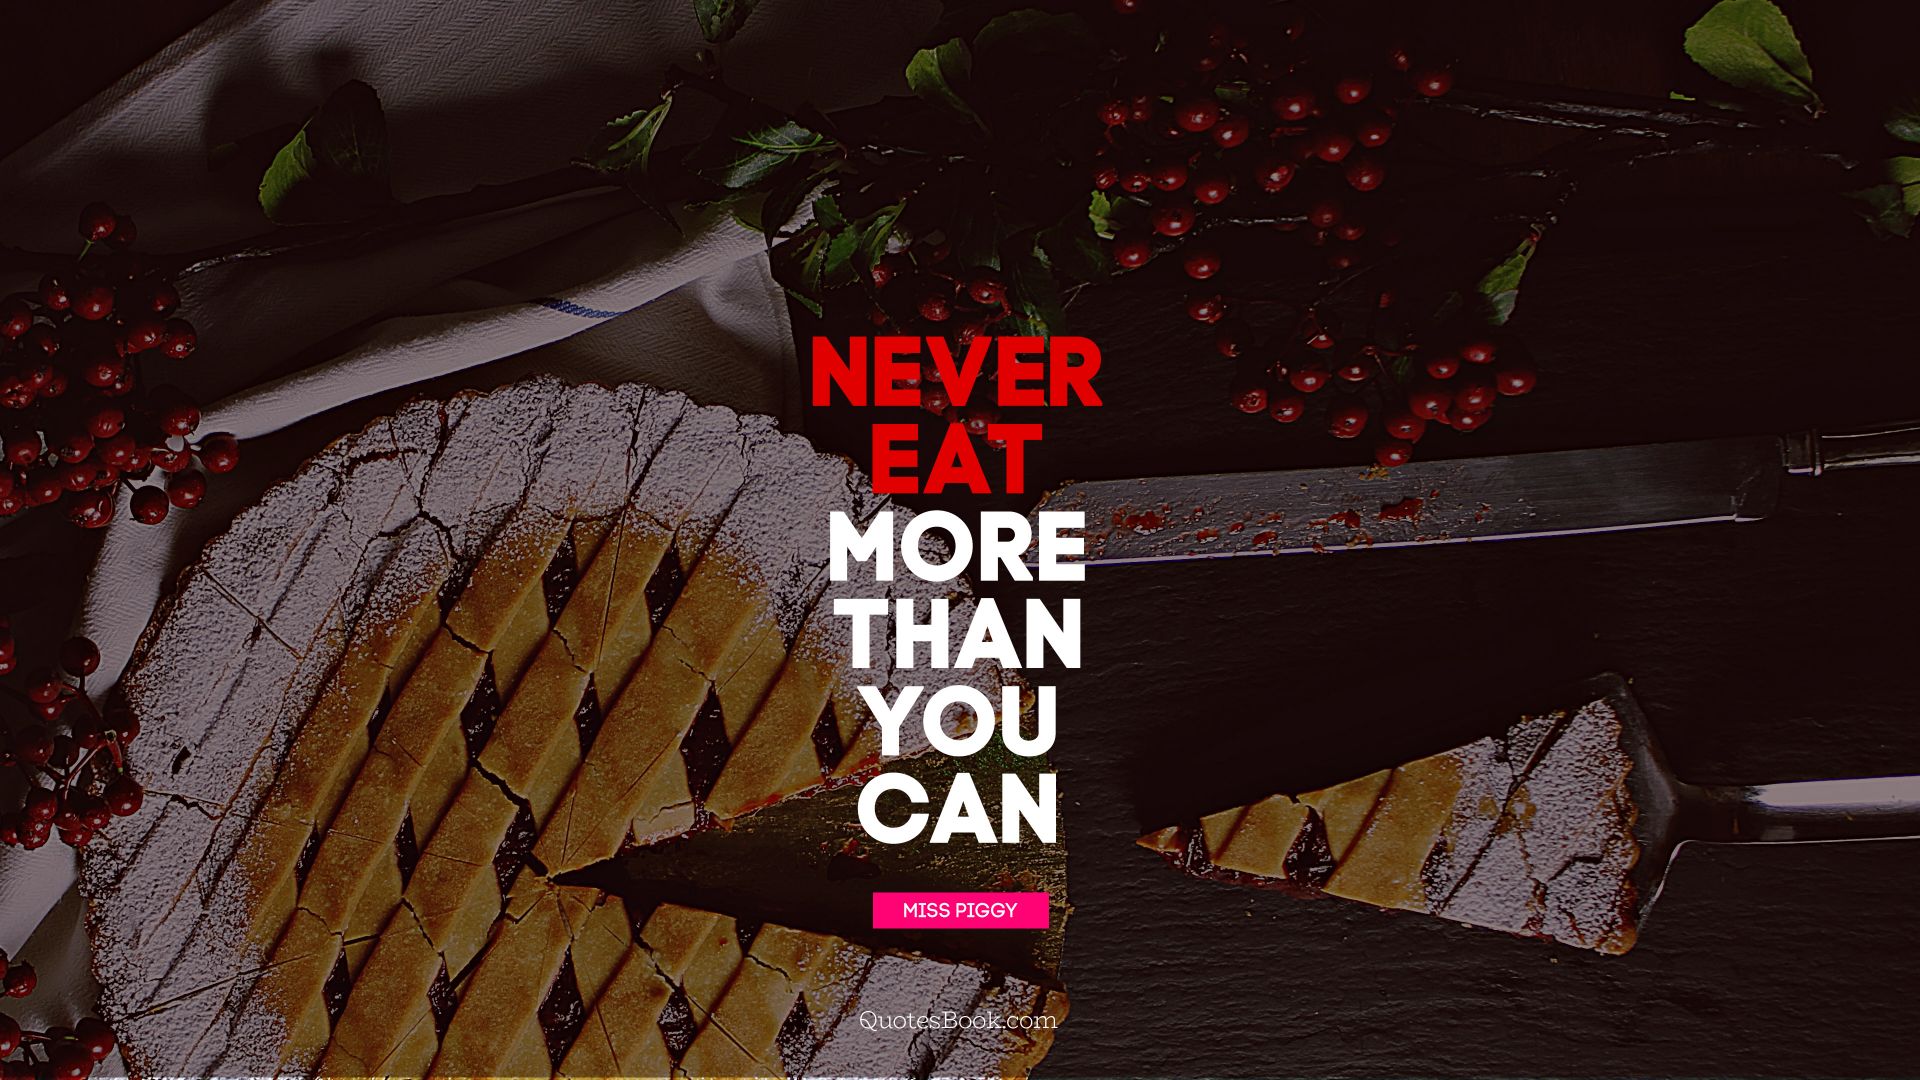 Never eat more than you can life. - Quote by Miss Piggy